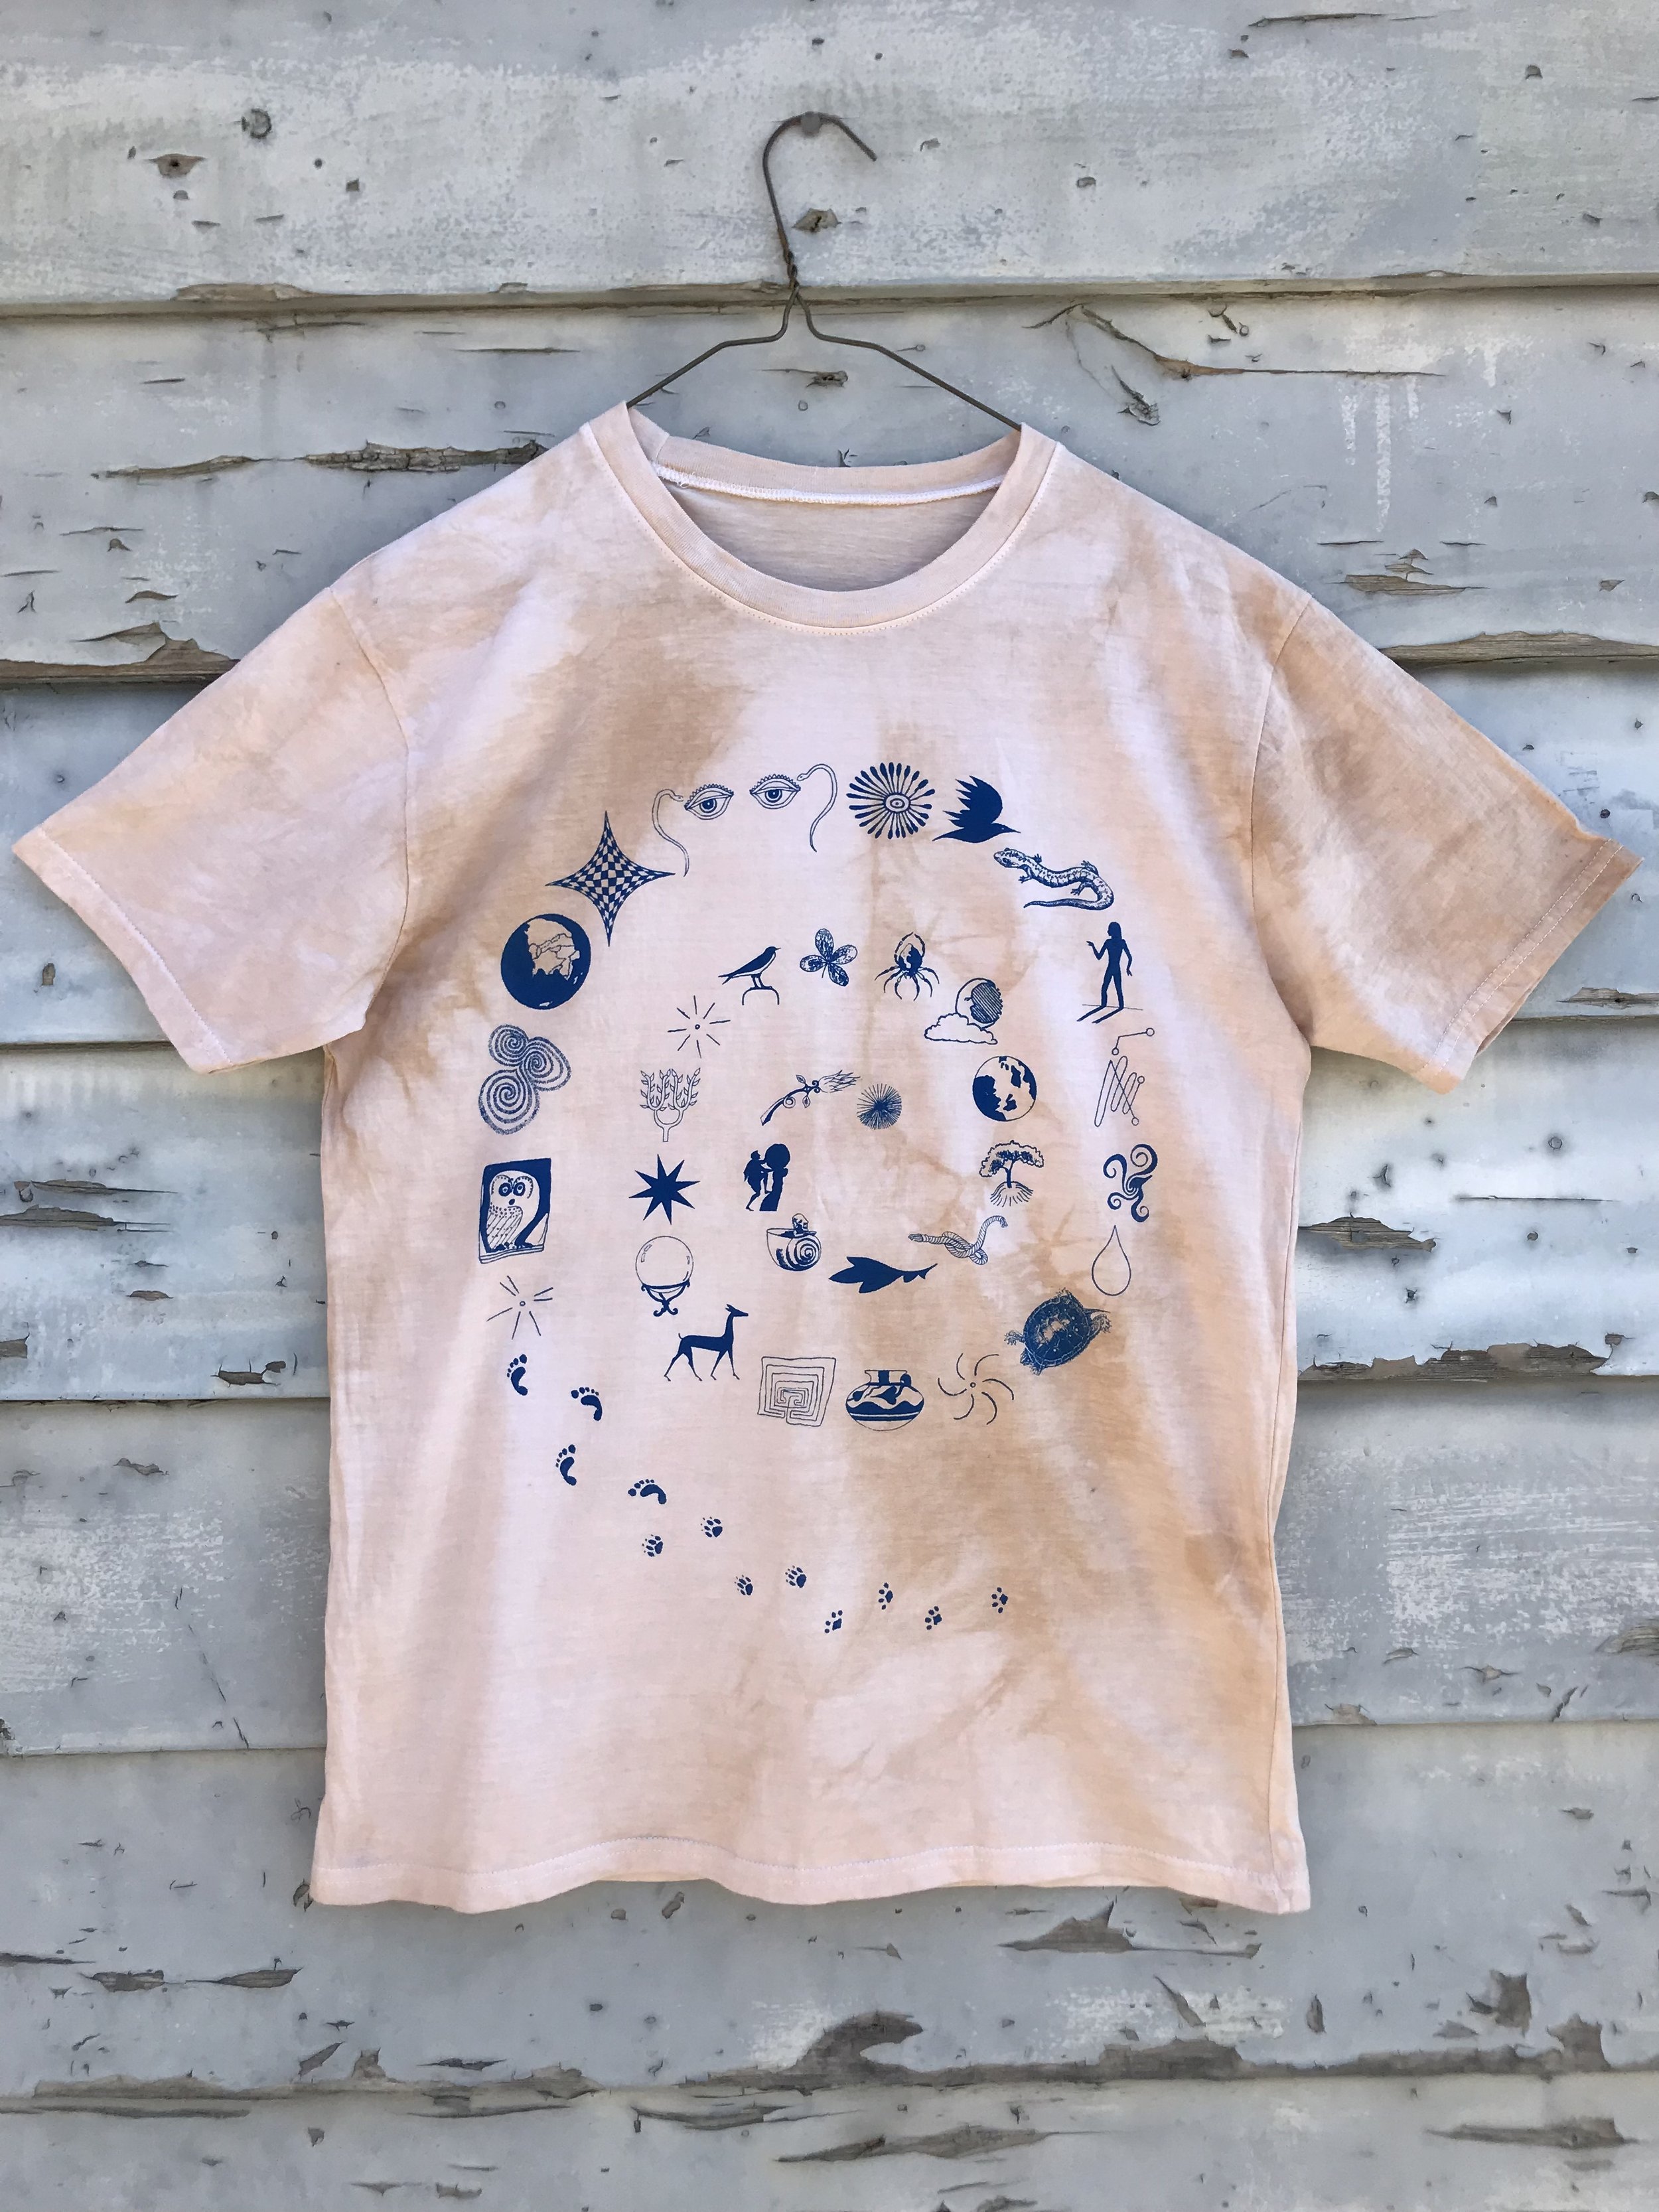  Spiral T-shirt  Hand dyed and screenprinted  2022 